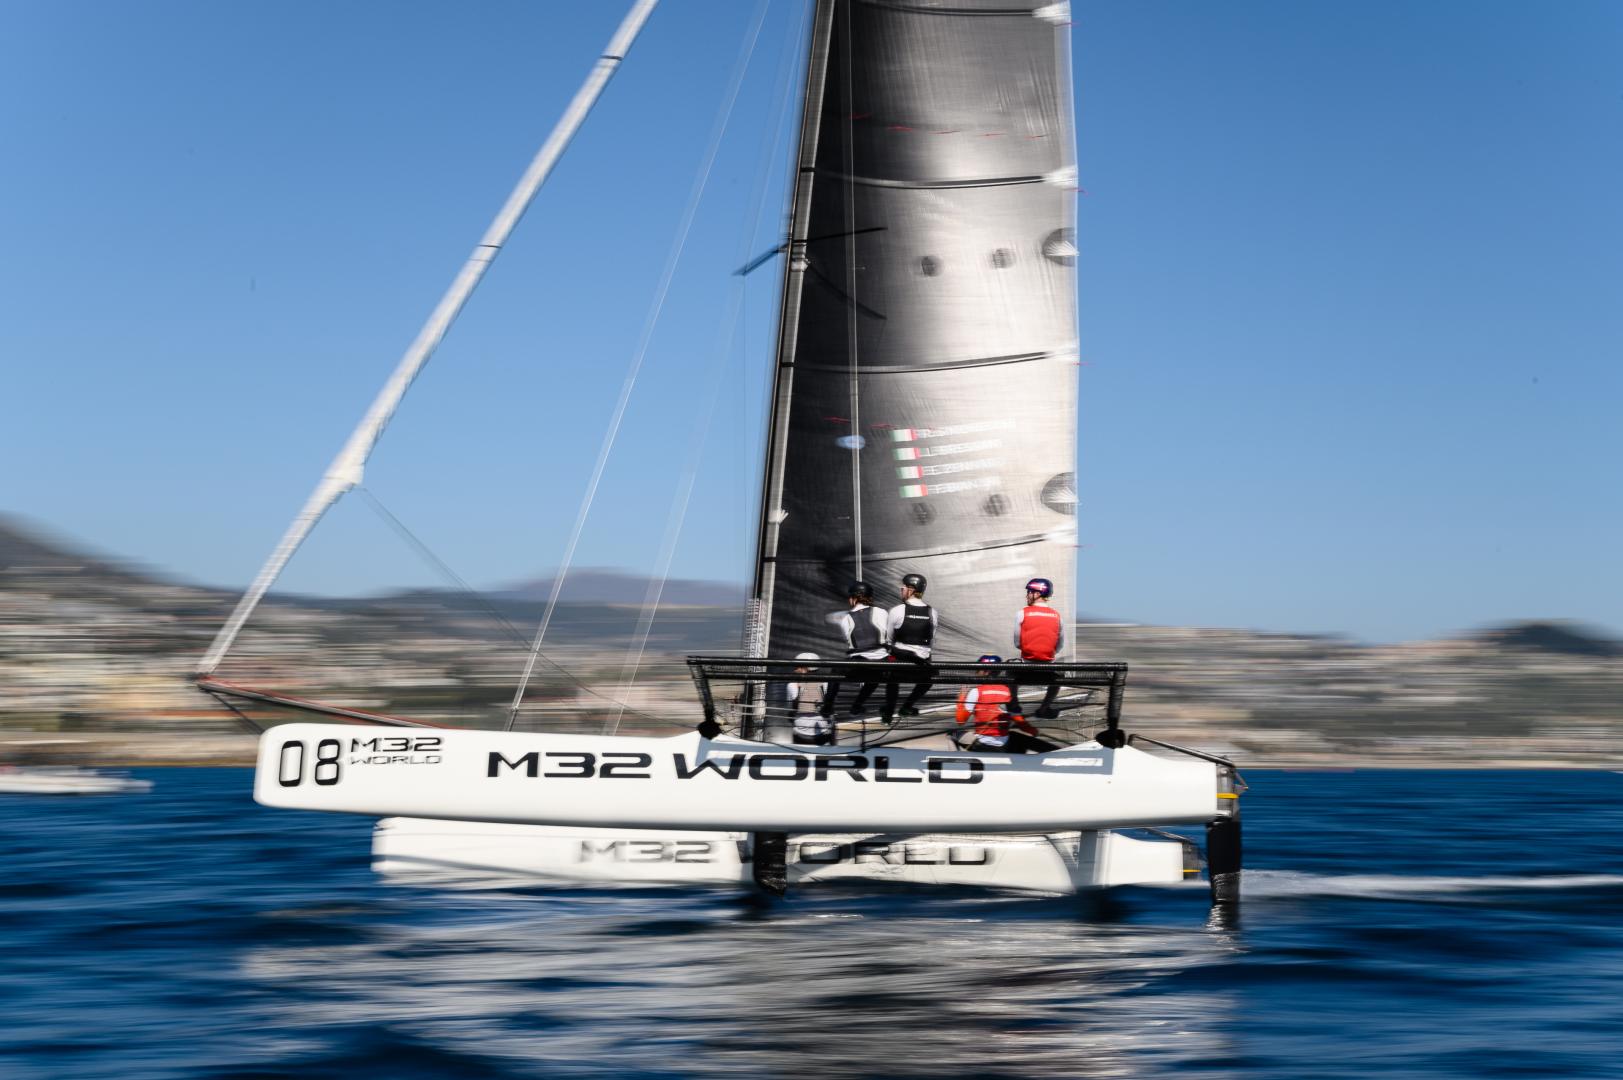 M32 European Series 2020 to visit Italy, Netherlands and Sweden